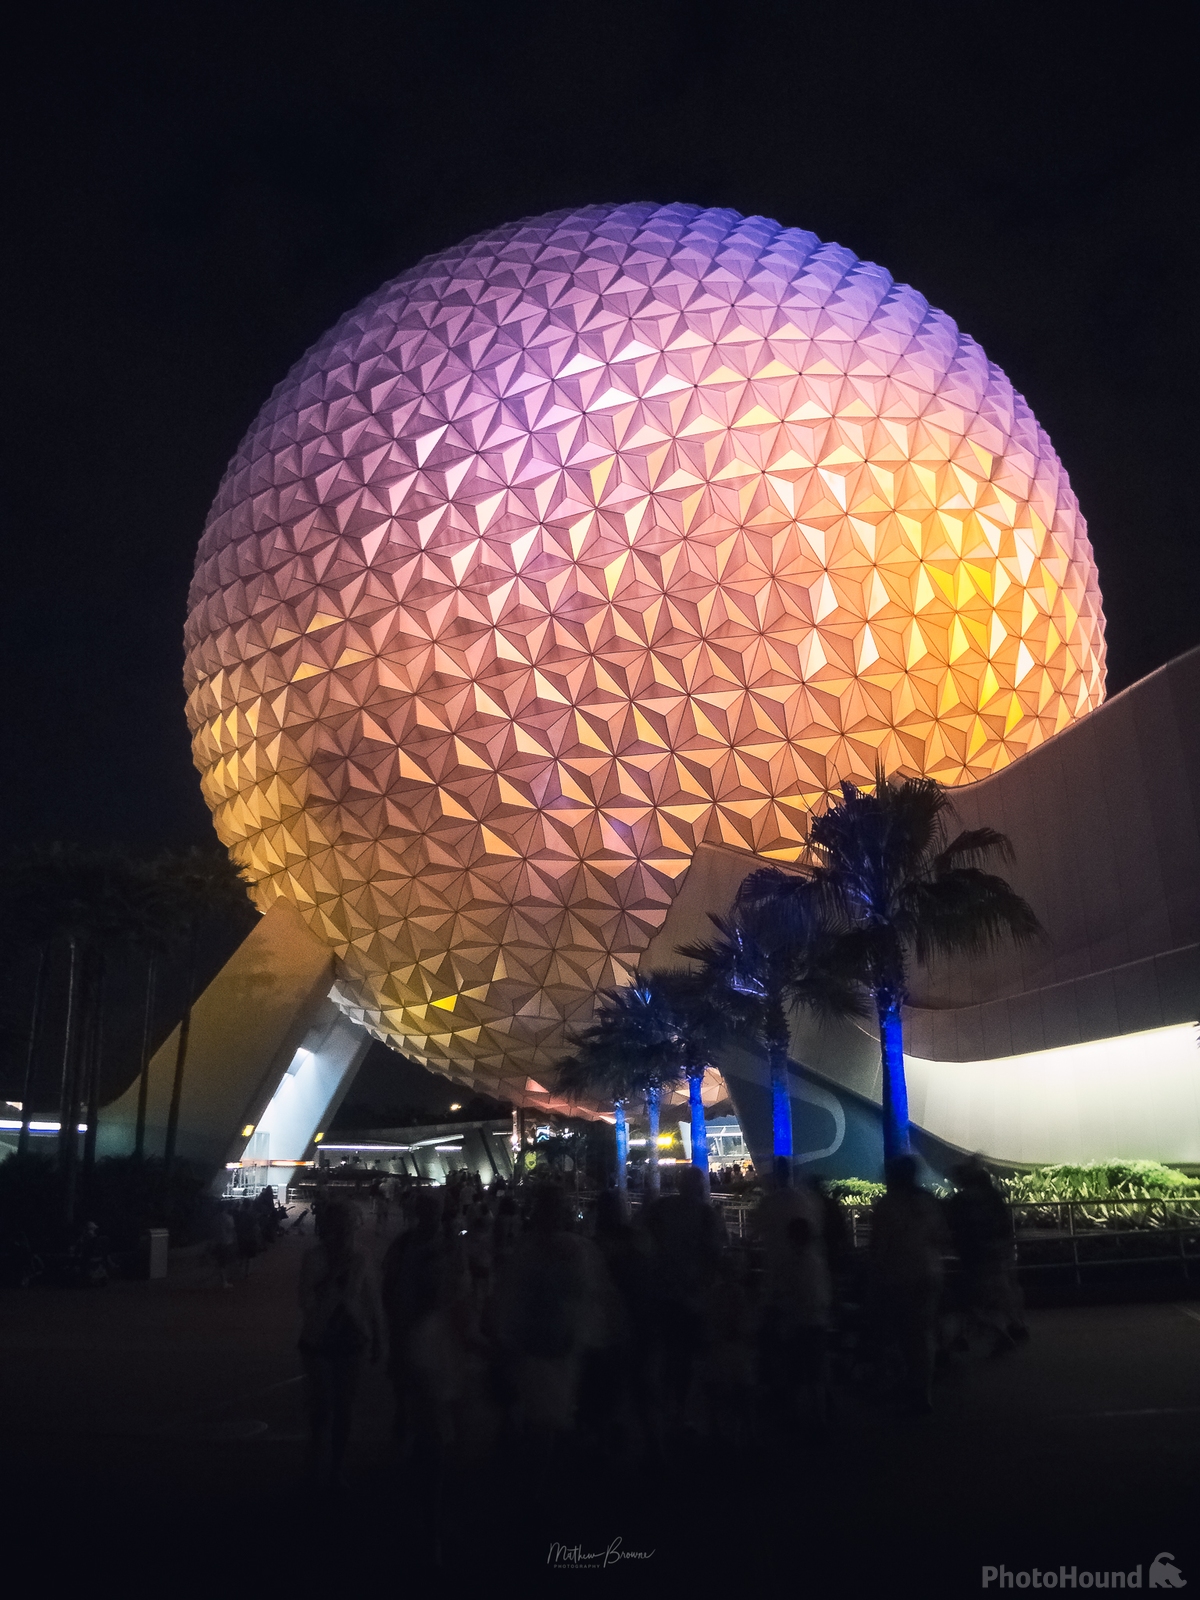 Image of Epcot by Mathew Browne